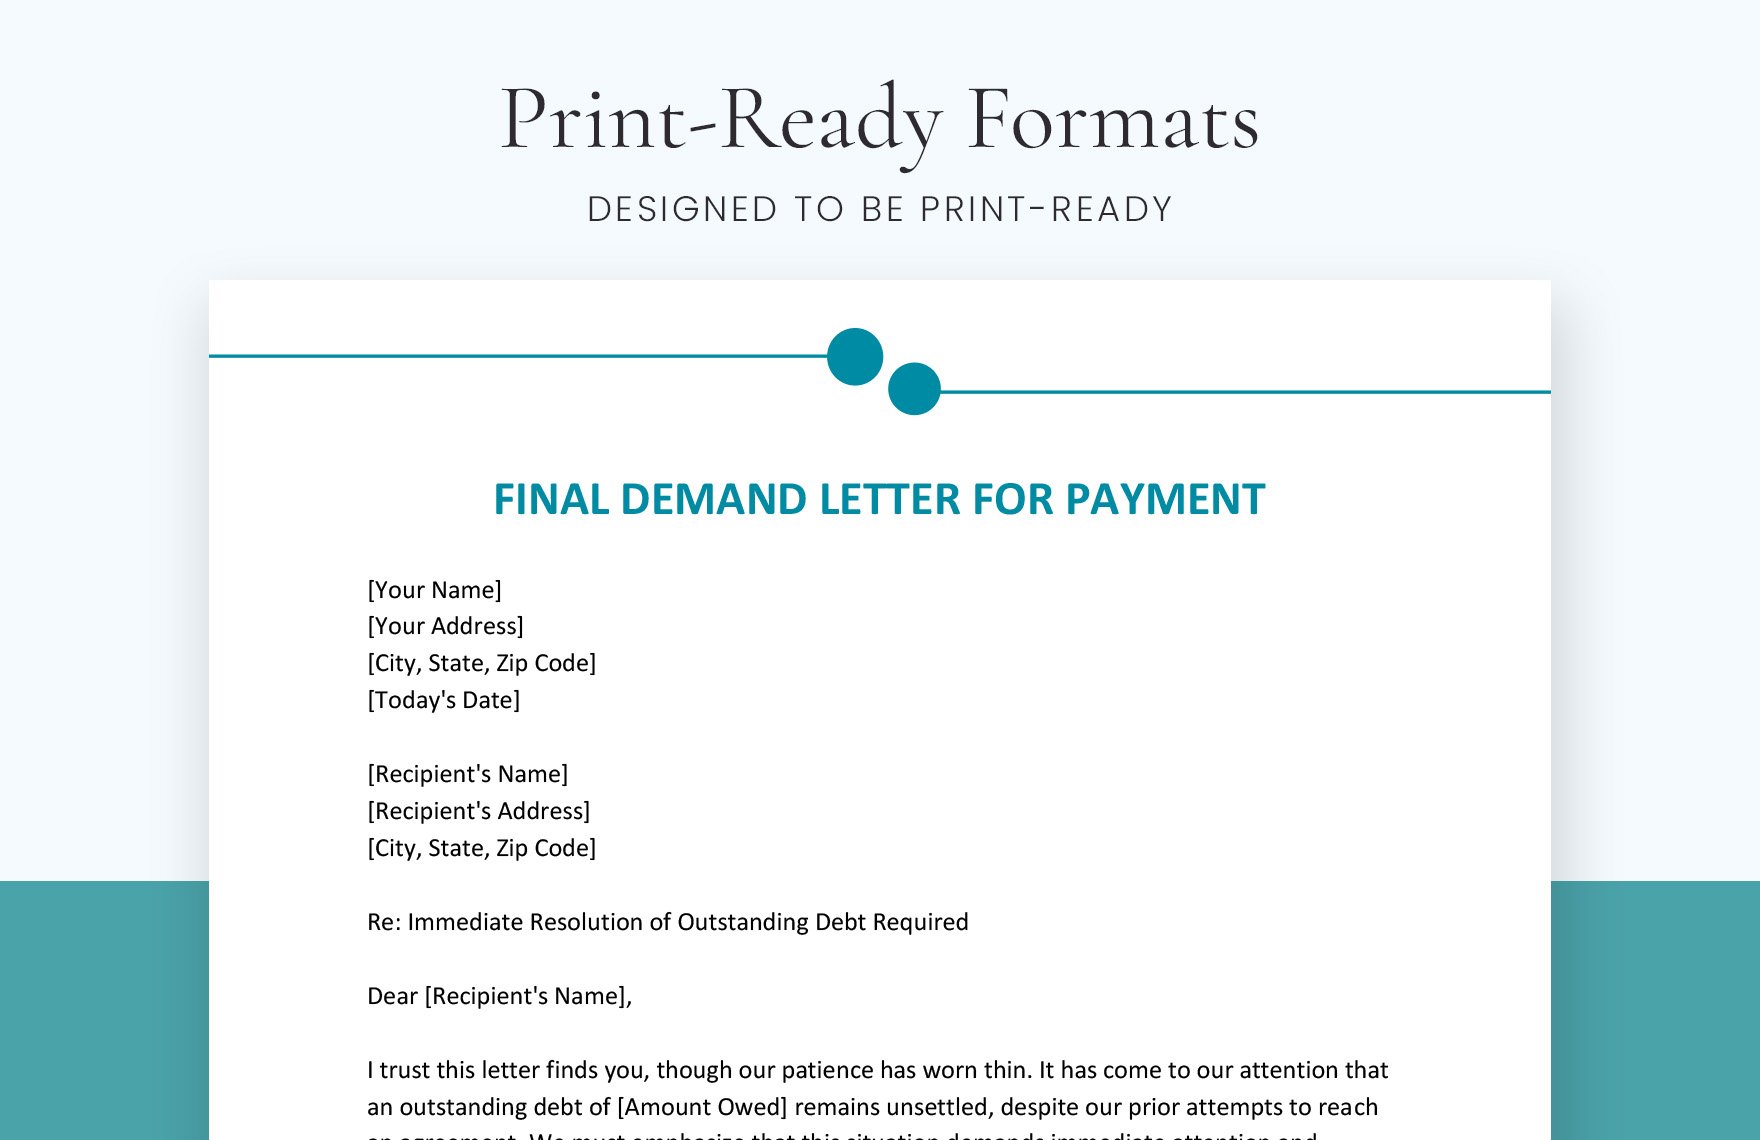 Final Demand Letter For Payment